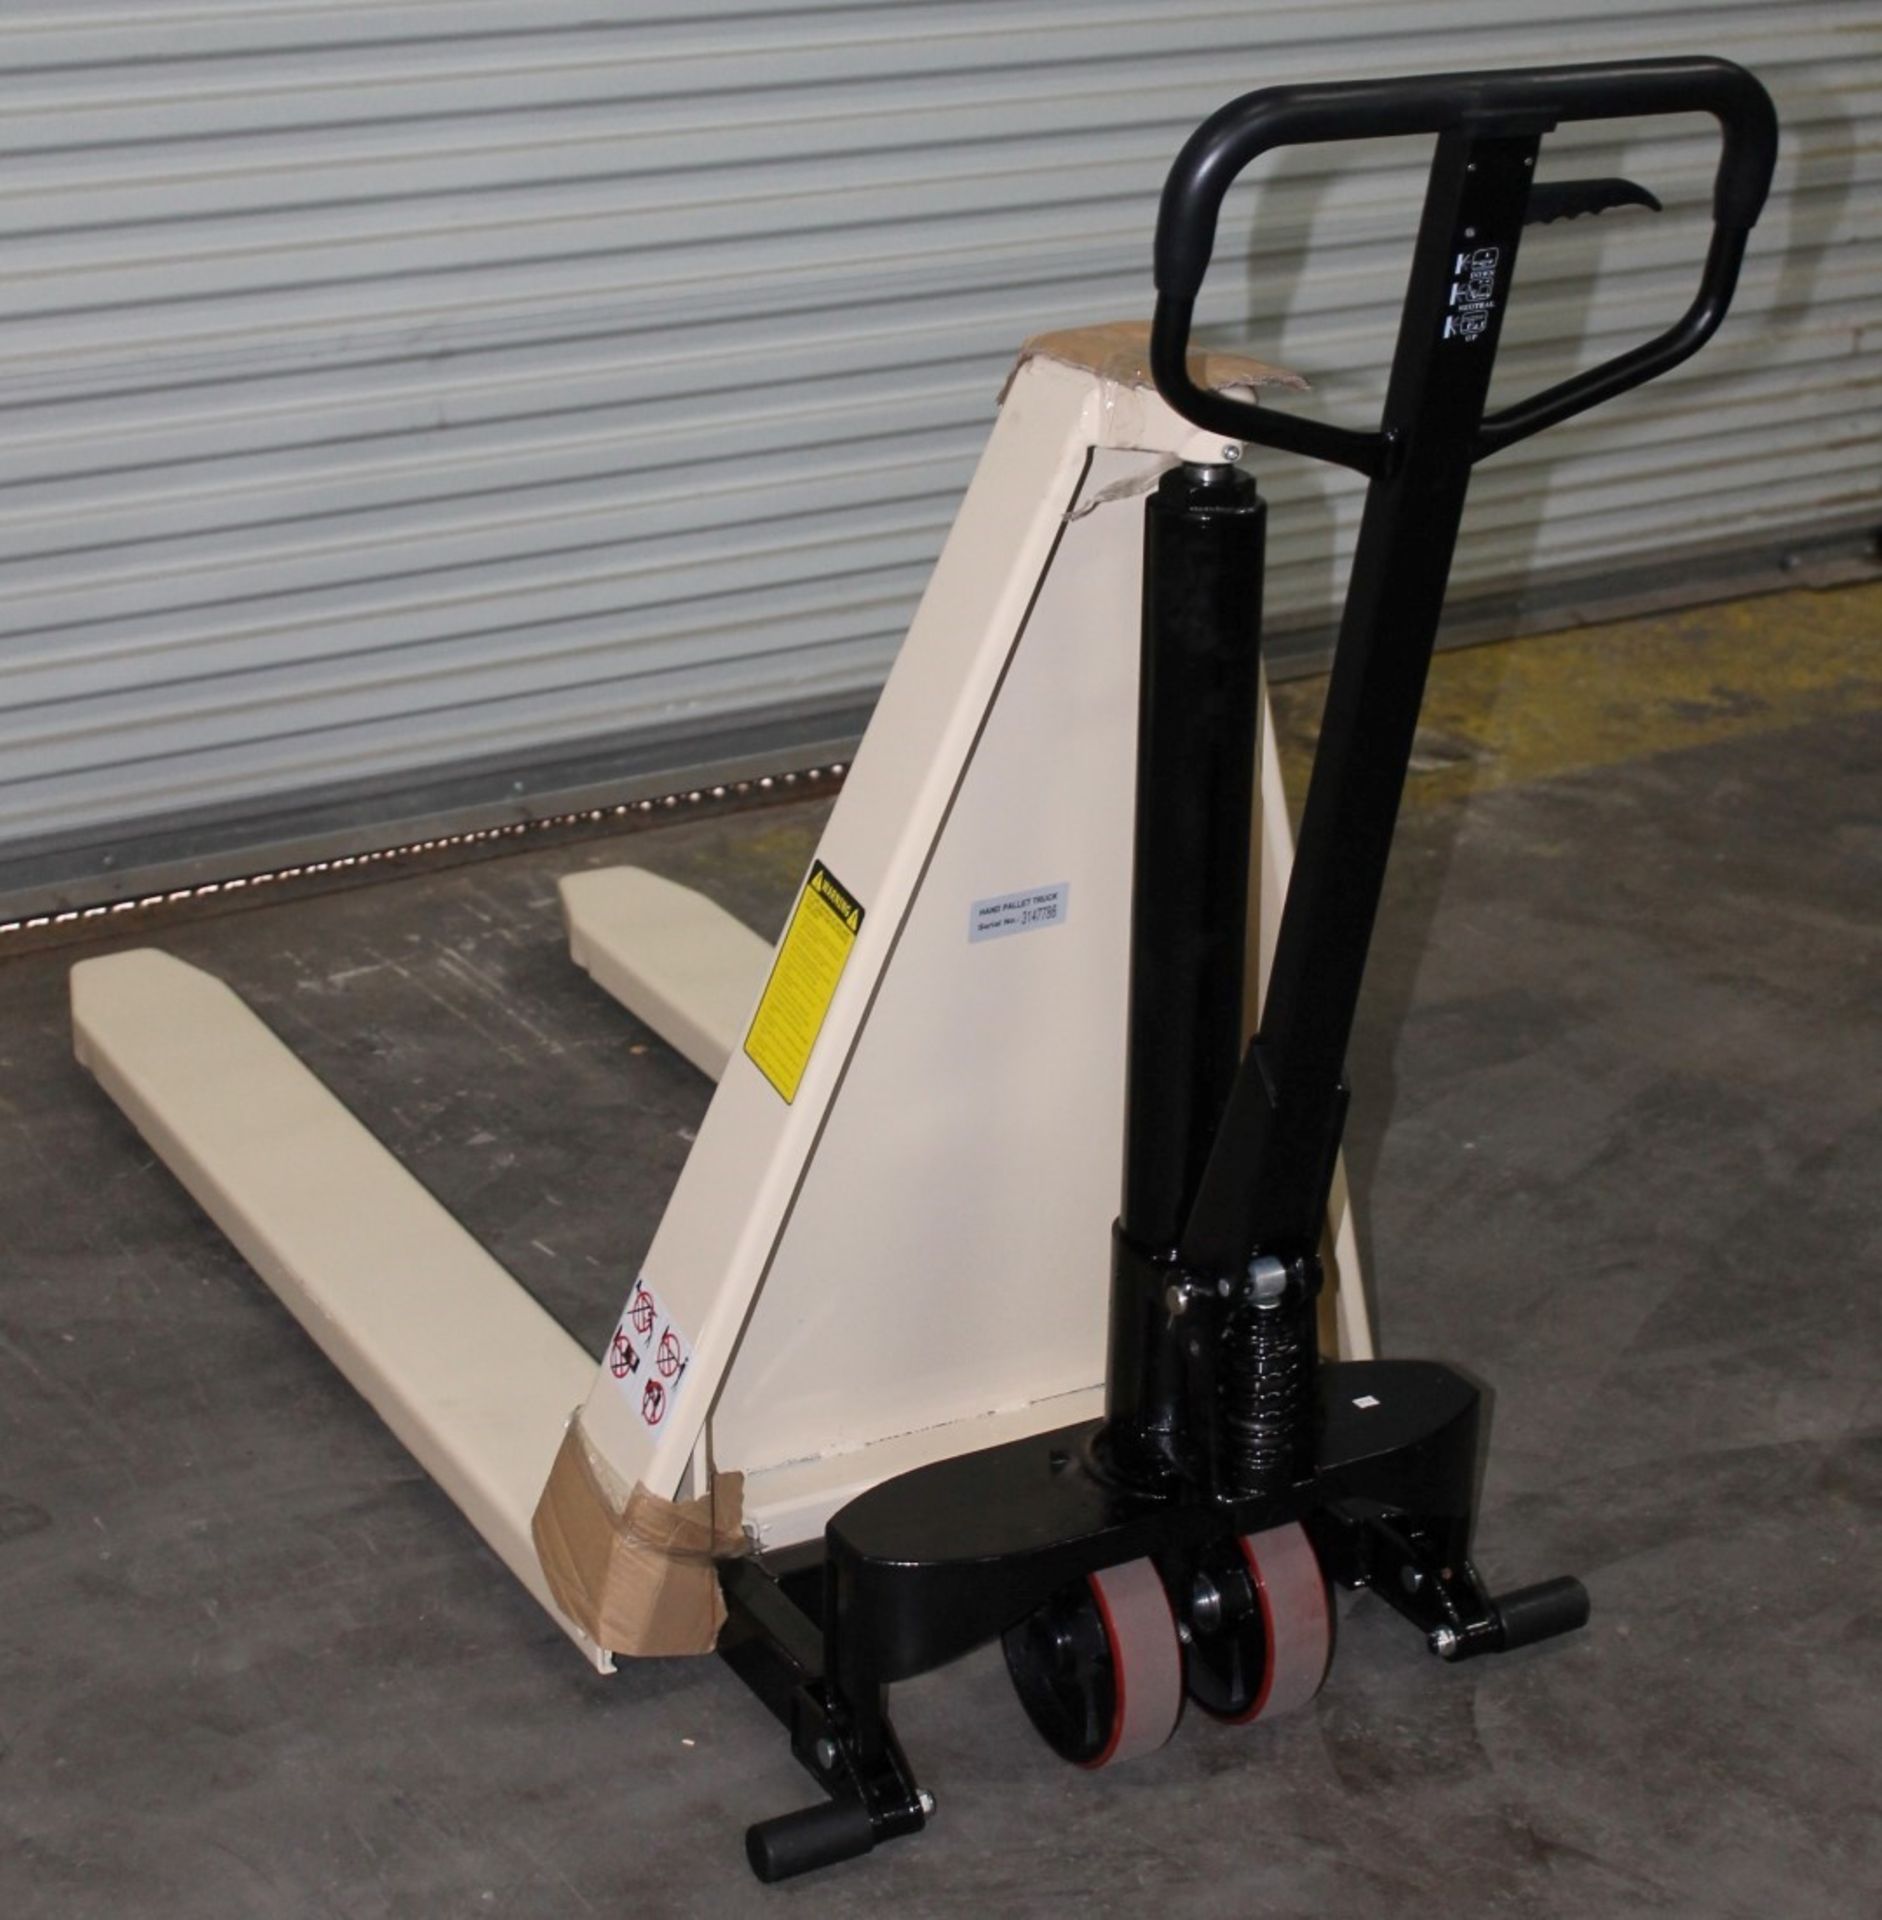 HIGH LIFT PALLET TRUCK,  CAPACITY: 2200 lb, FORK SIZE: 27" x 48", LOWERED FORK HEIGHT: 3.35 - Image 3 of 5